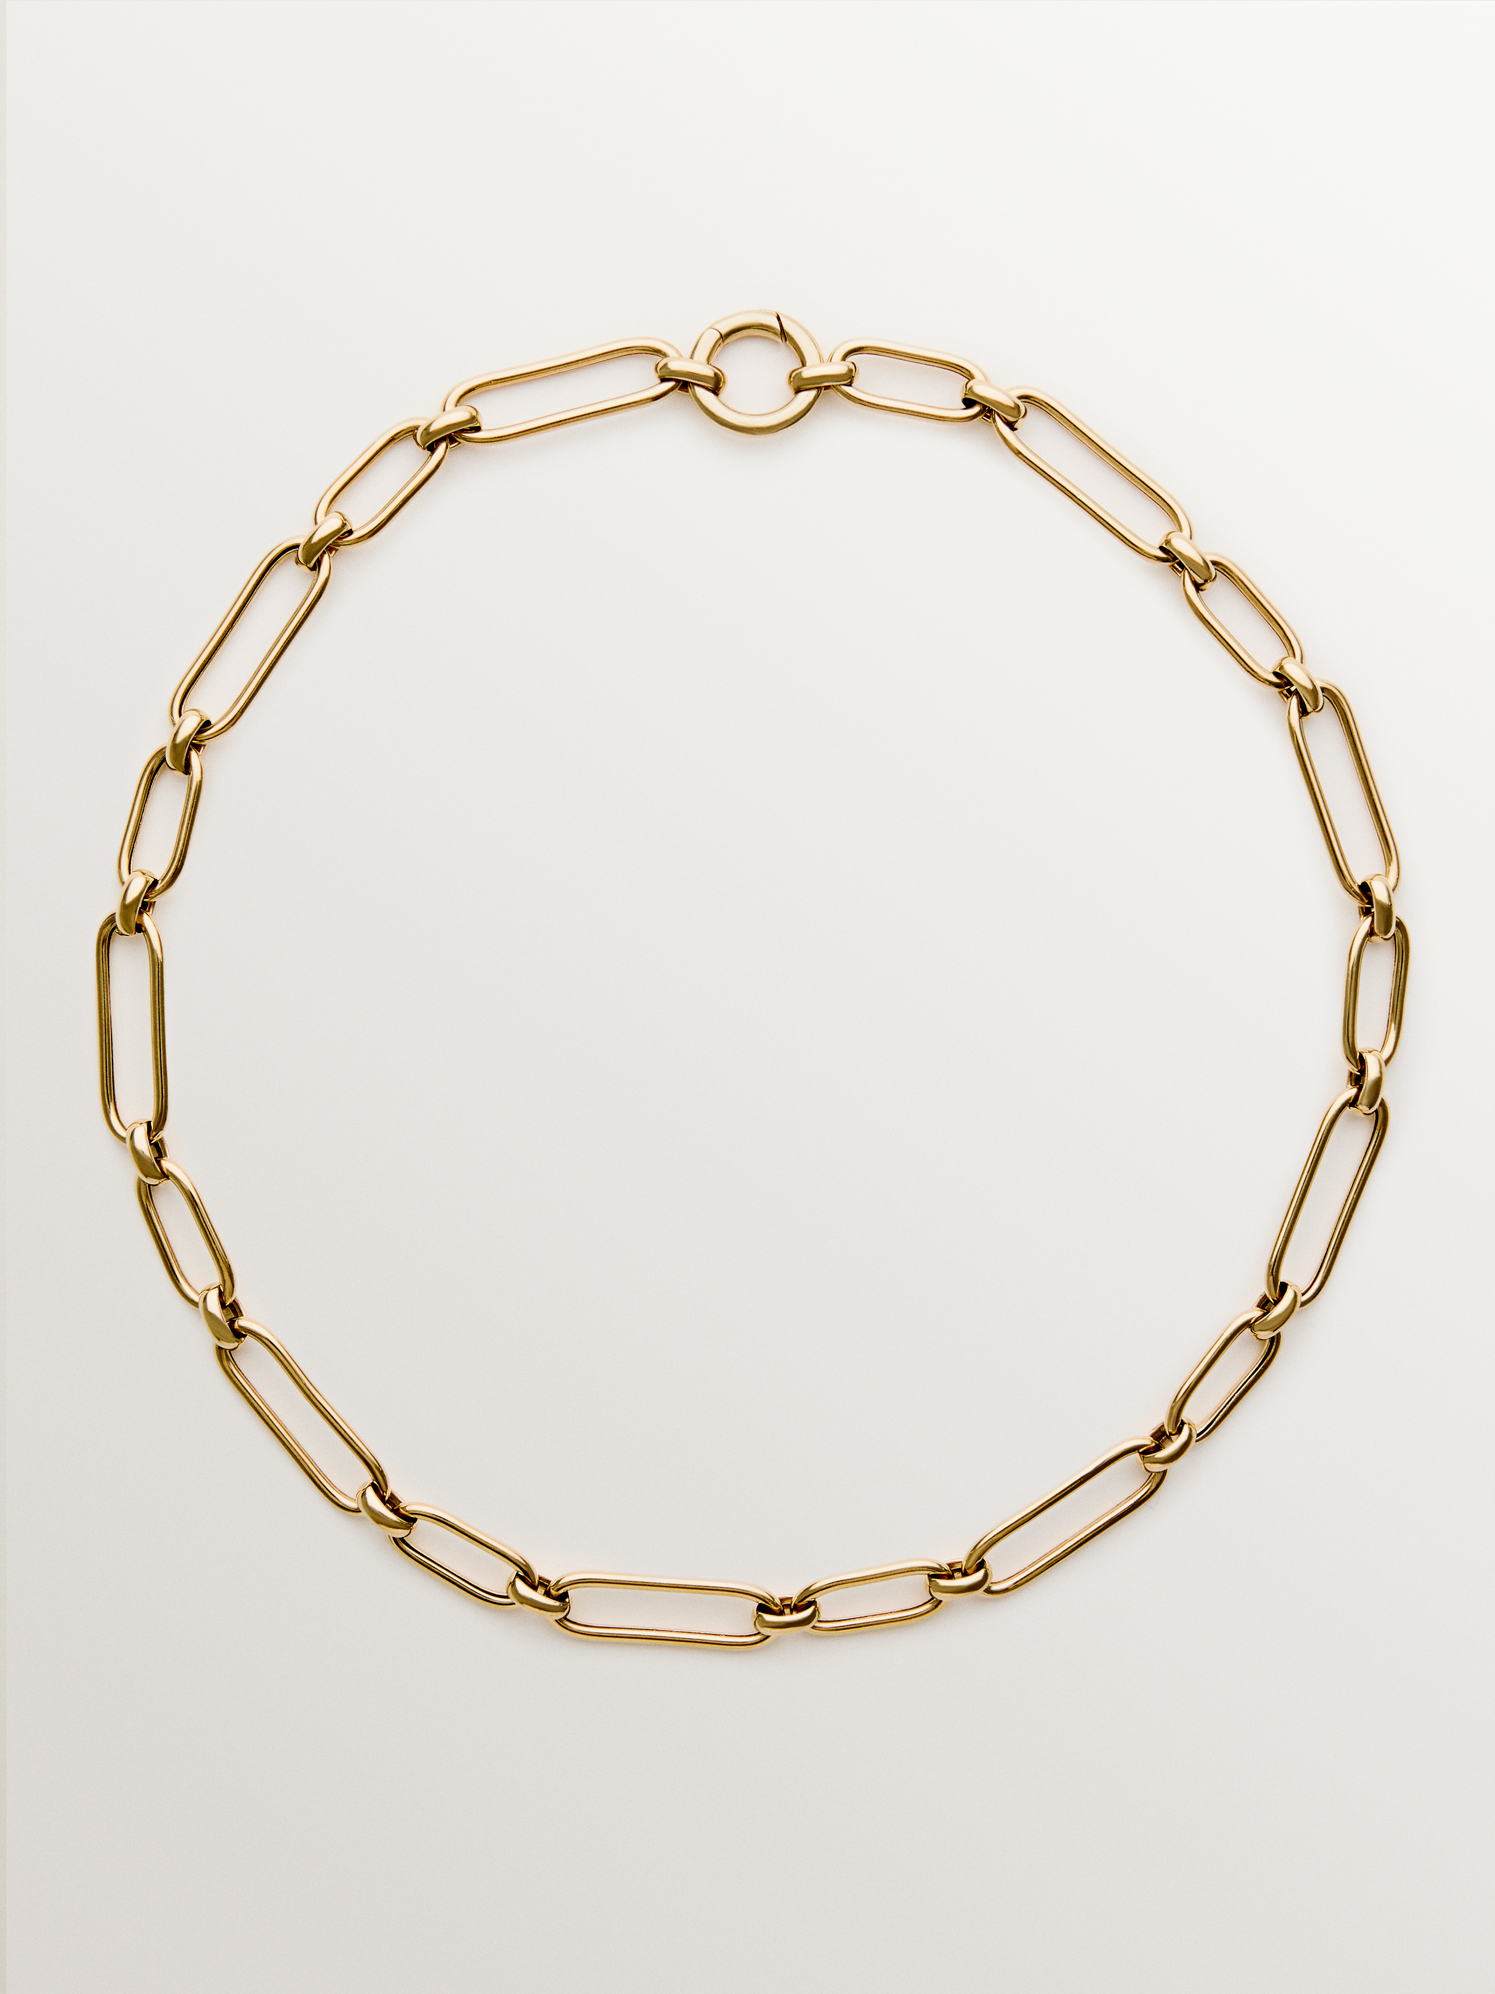 18K yellow gold plated 925 silver chain with rectangular links